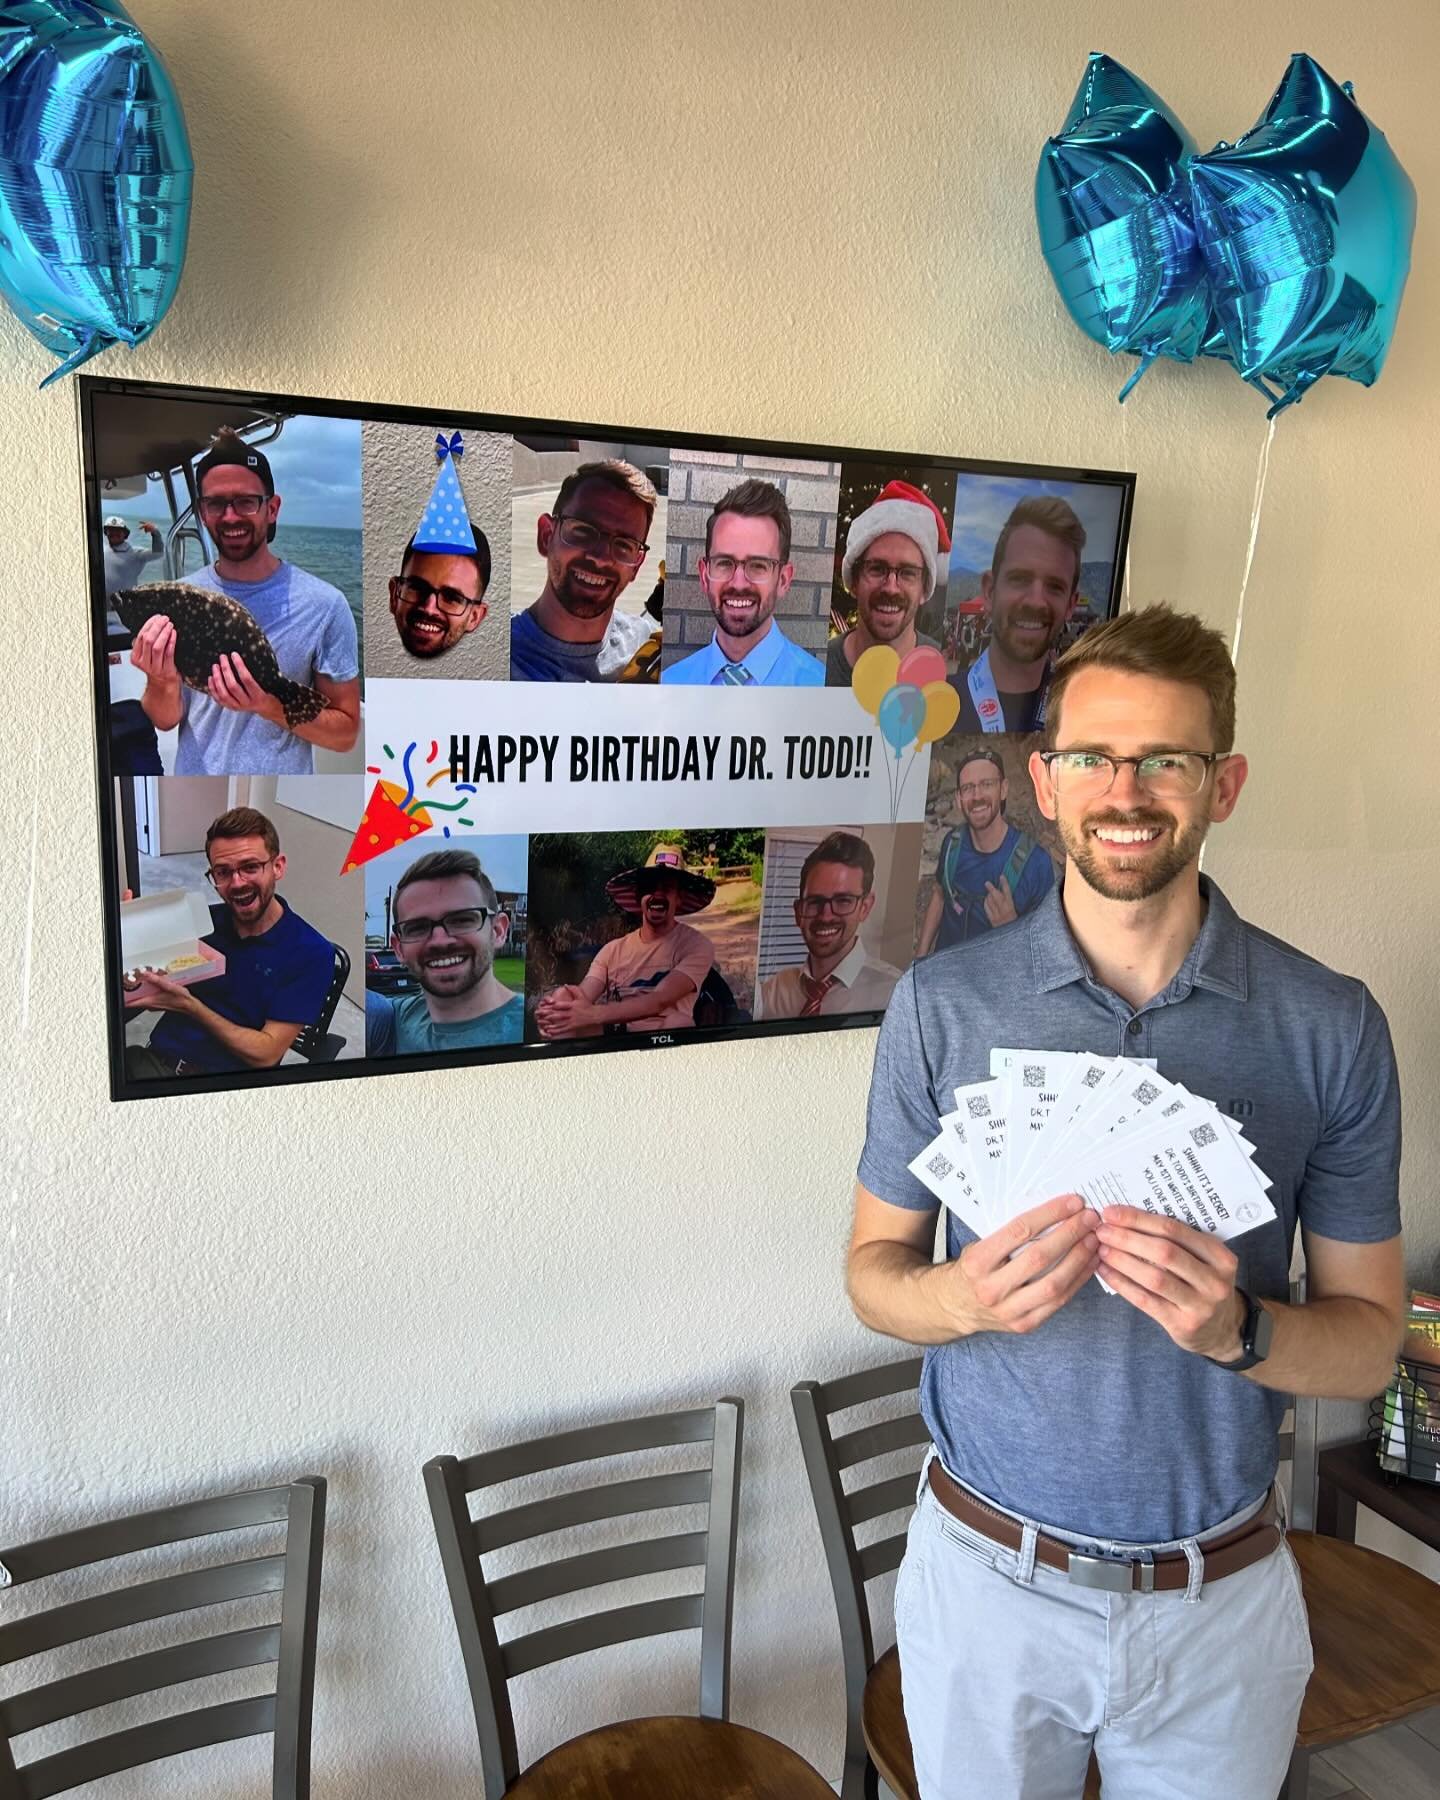 Happiest of birthdays to our one and only Dr. Todd! We are so grateful to have him in our lives! His smile warms our hearts, his jokes are top notch, and his adjustments are literally life changing! We appreciate those of you who stopped in and fille